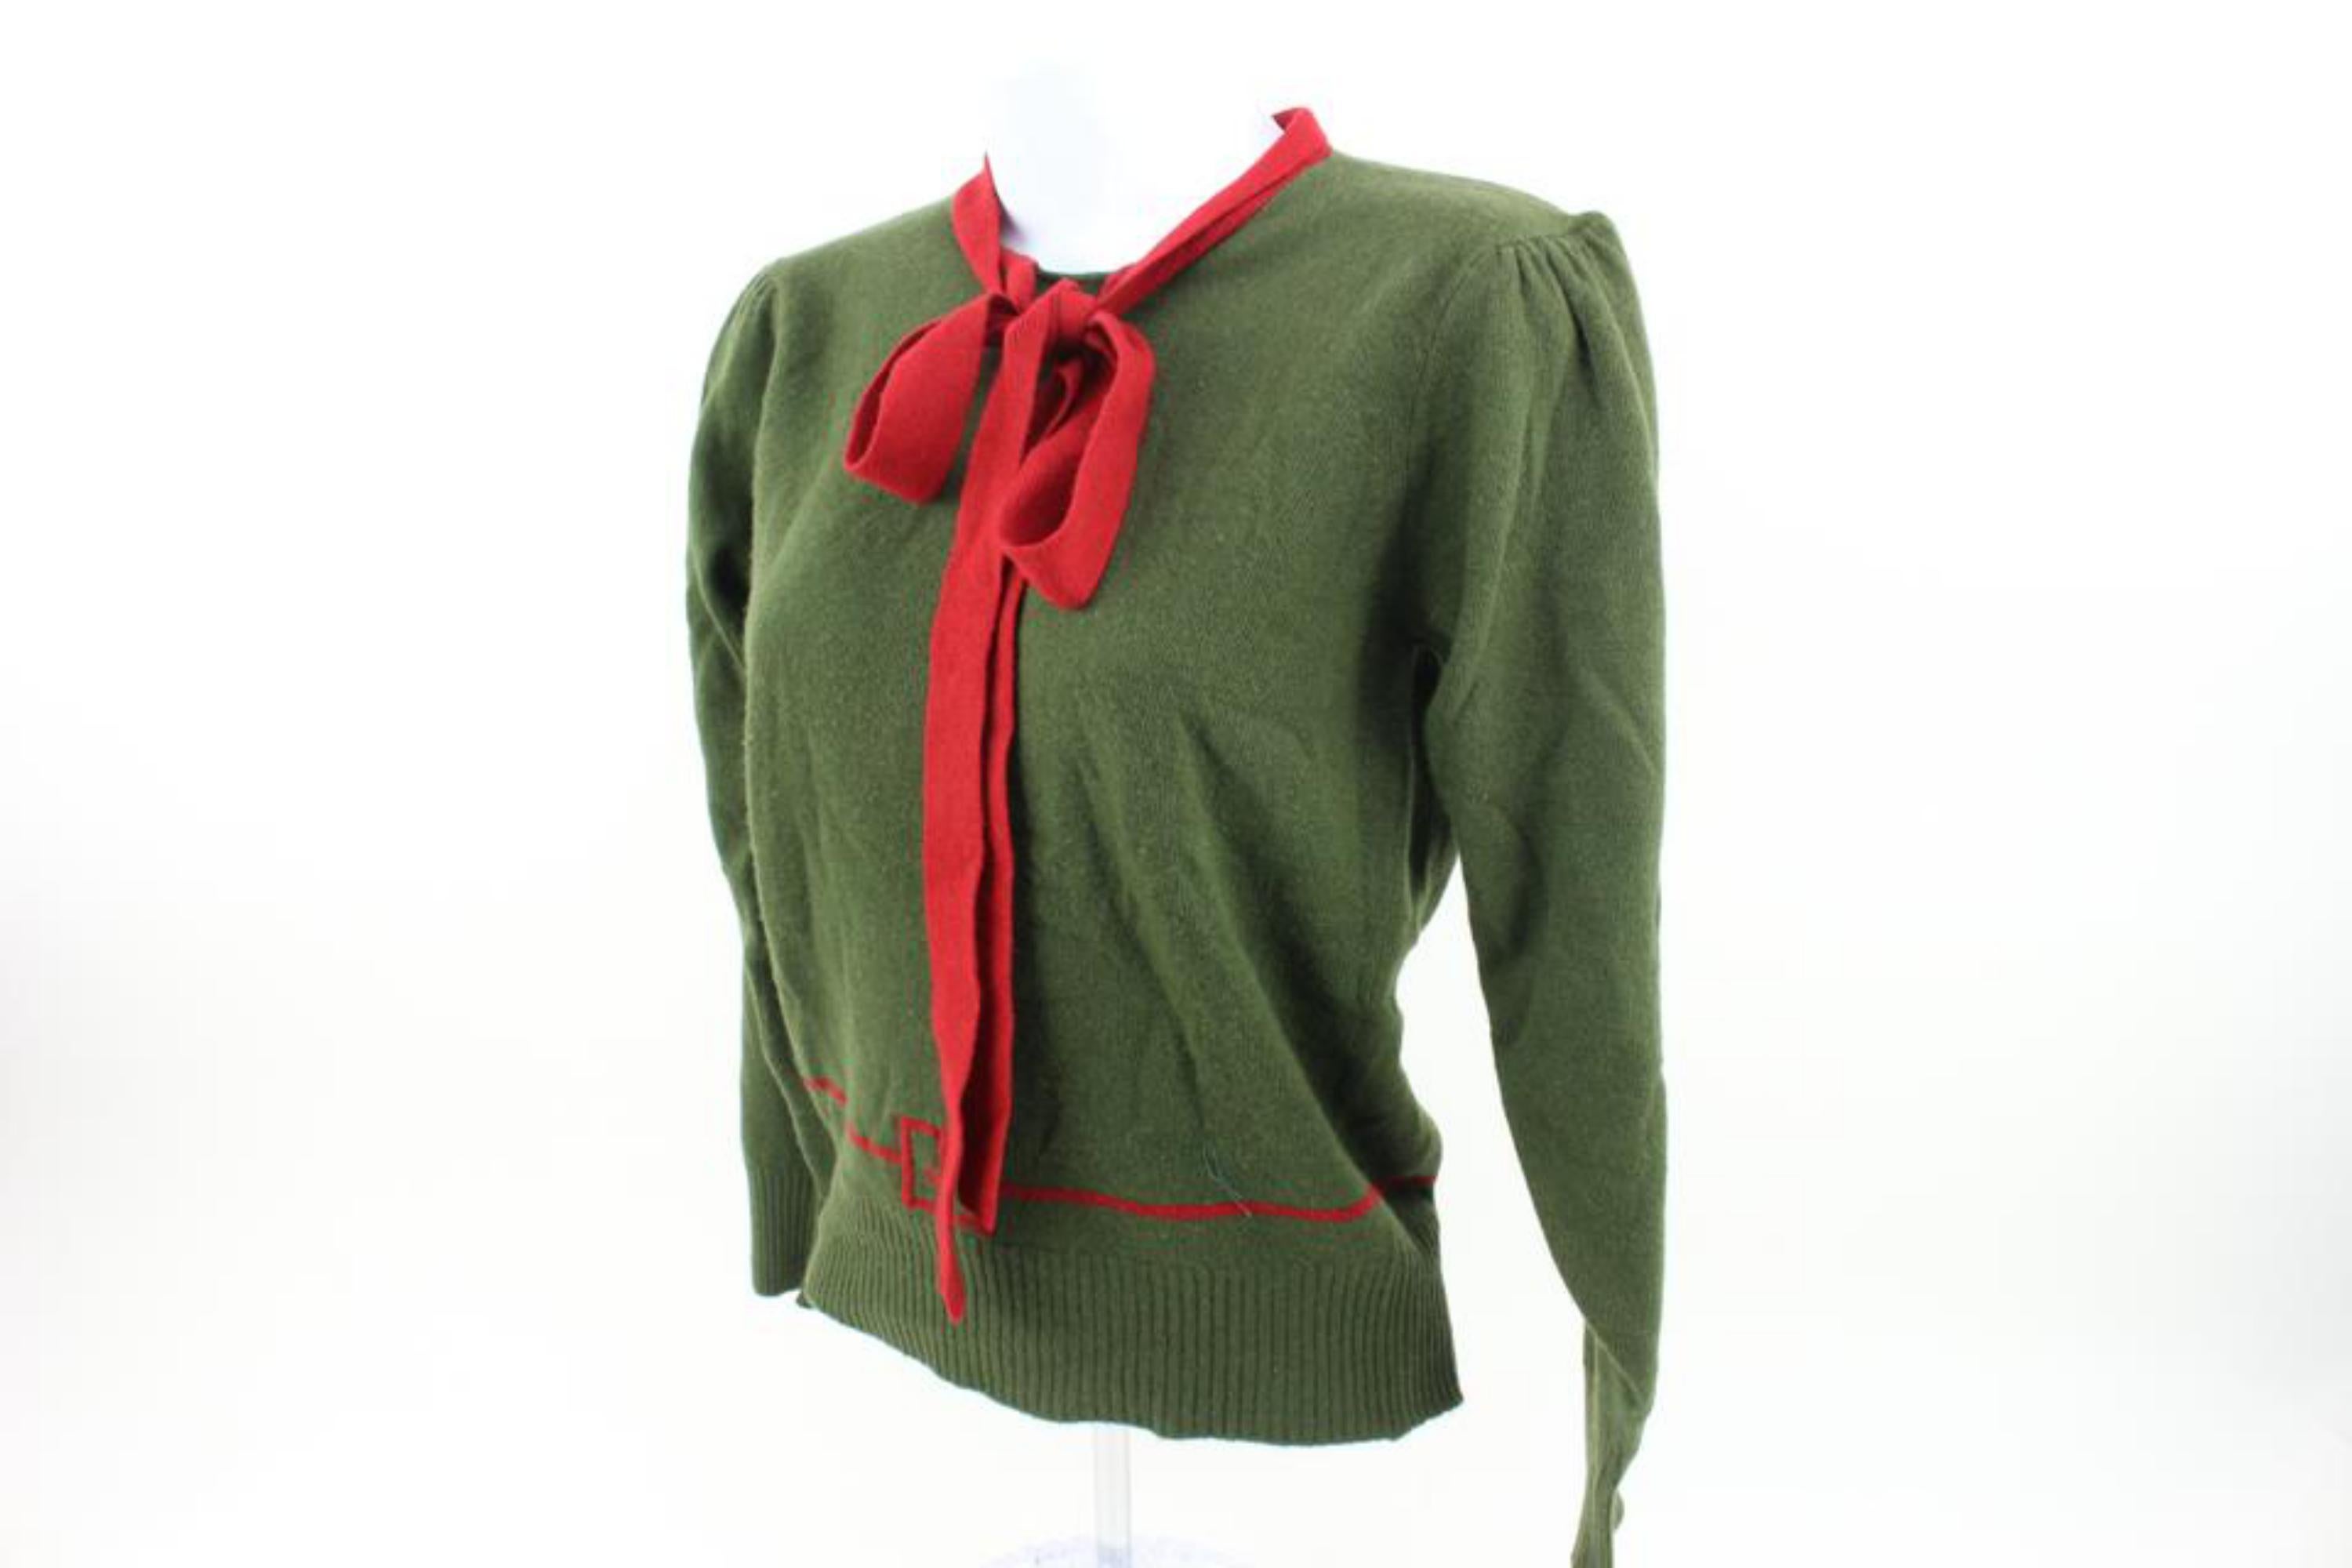 Gucci Green x Web Cashmere Bow Web Ribbon Tie Sweater Cardigan 121g38
Made In: Italy
Measurements: Length:  16.5